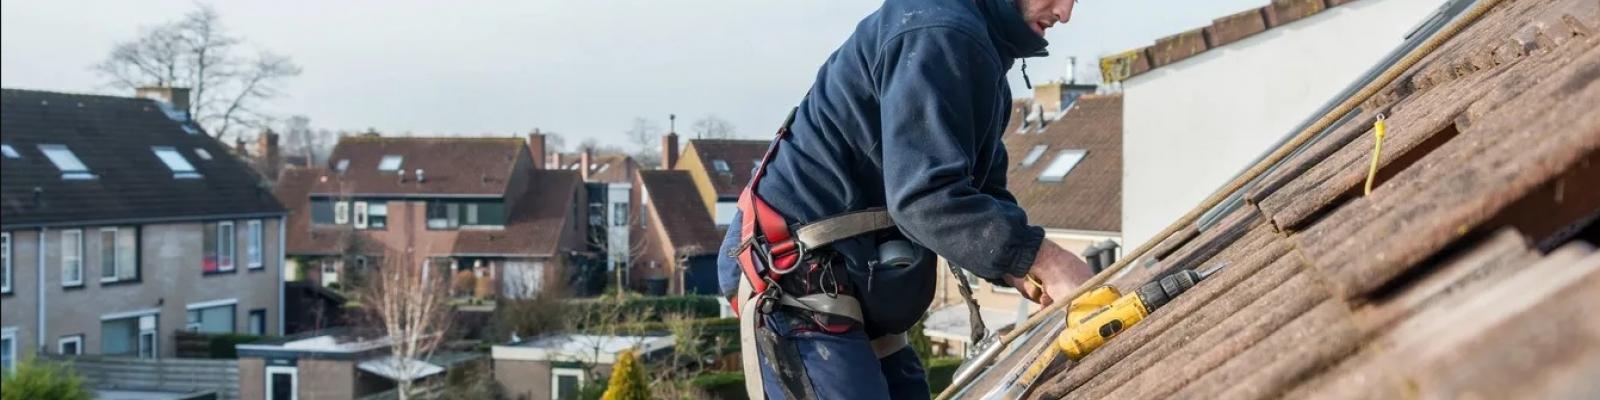 Are you looking for professional roofers in Cowdenbeath, Fife, Edinburgh and central surrounding areas? We are Caledonia Home Improvements, based in Cowdenbeath, Fife.We have over 30 years combined experience in the roofing and property maintenance industry. Our wealth of expert services includes new roofs, roof repairs, roof cleaning and coatings, pitched roofing, flat roofs, rubber roofs, tiling and slating, fibre glass roofs, lead work, gutters, fascias and soffits, chimney repairs and much more. 